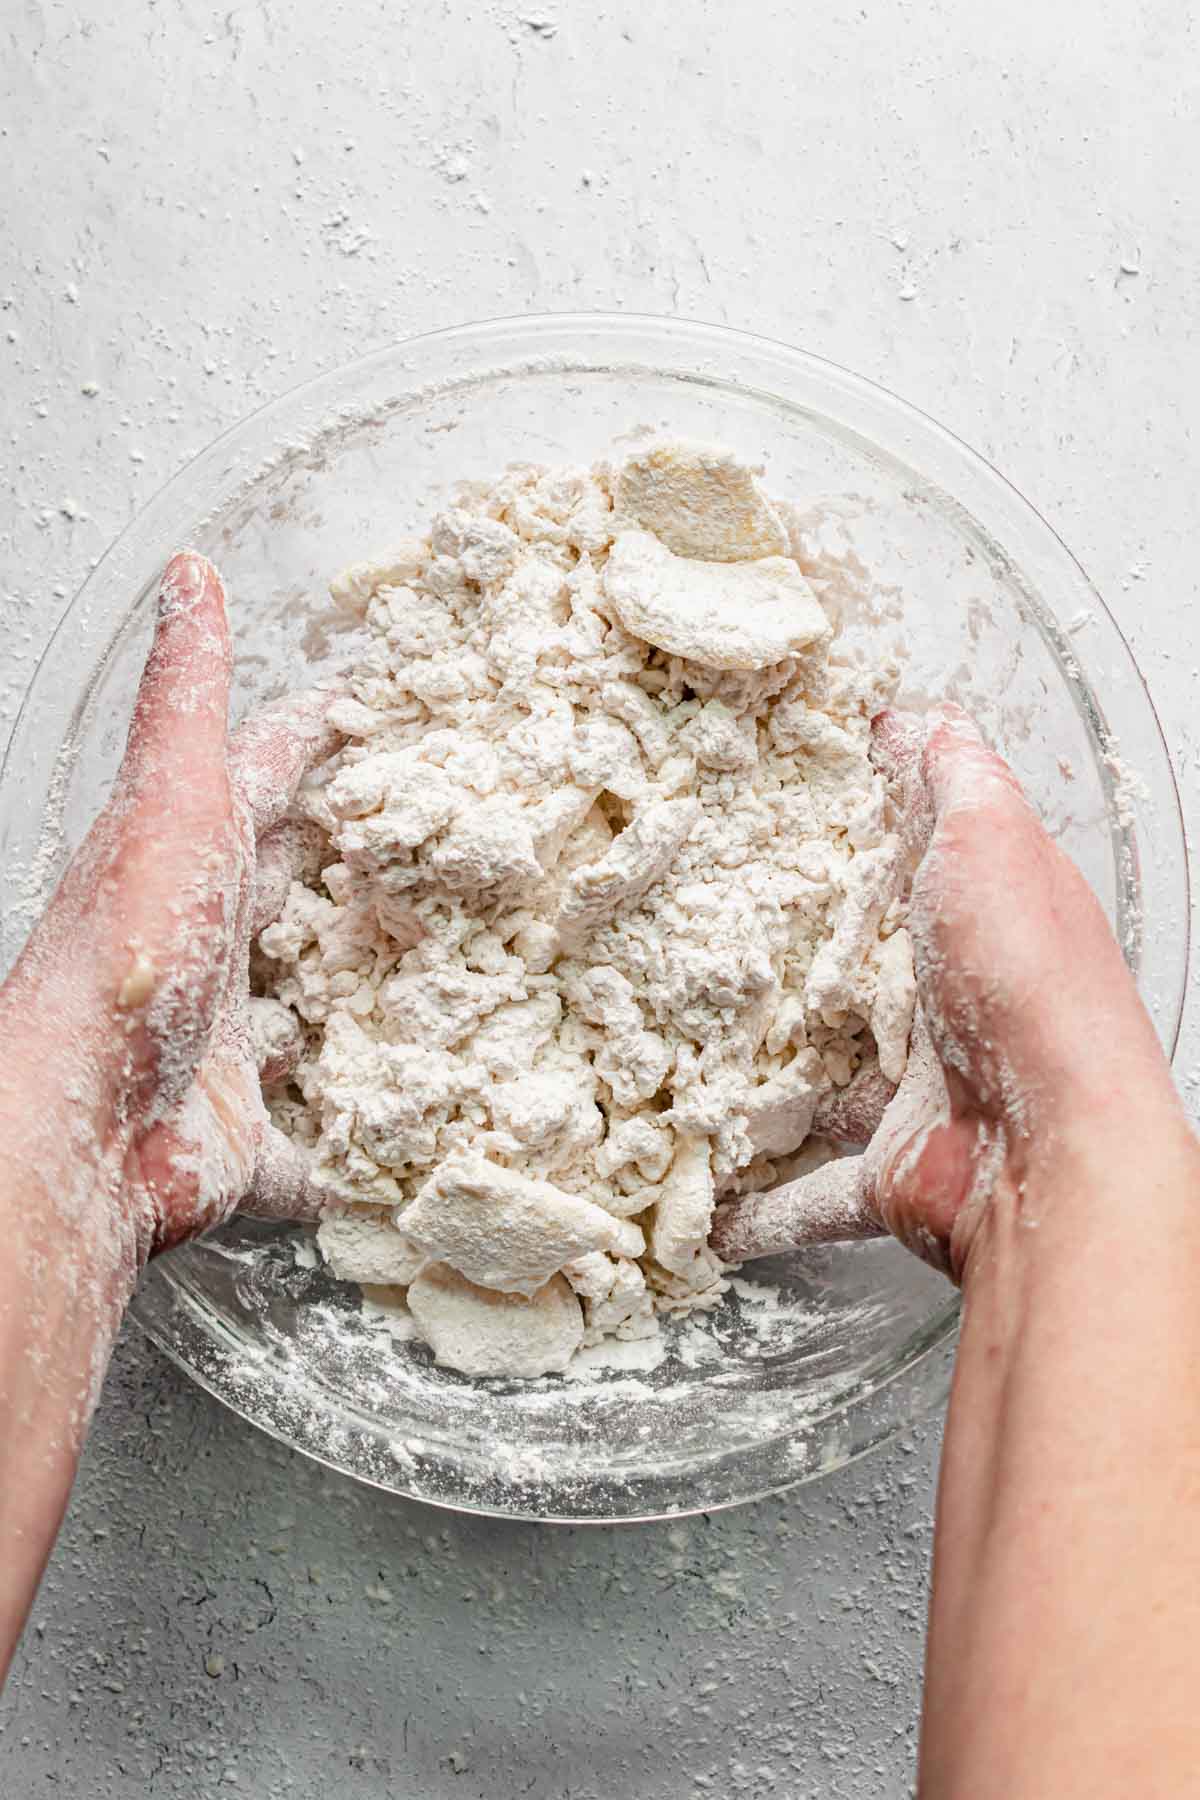 Two hands toss the butter, flour and water together.